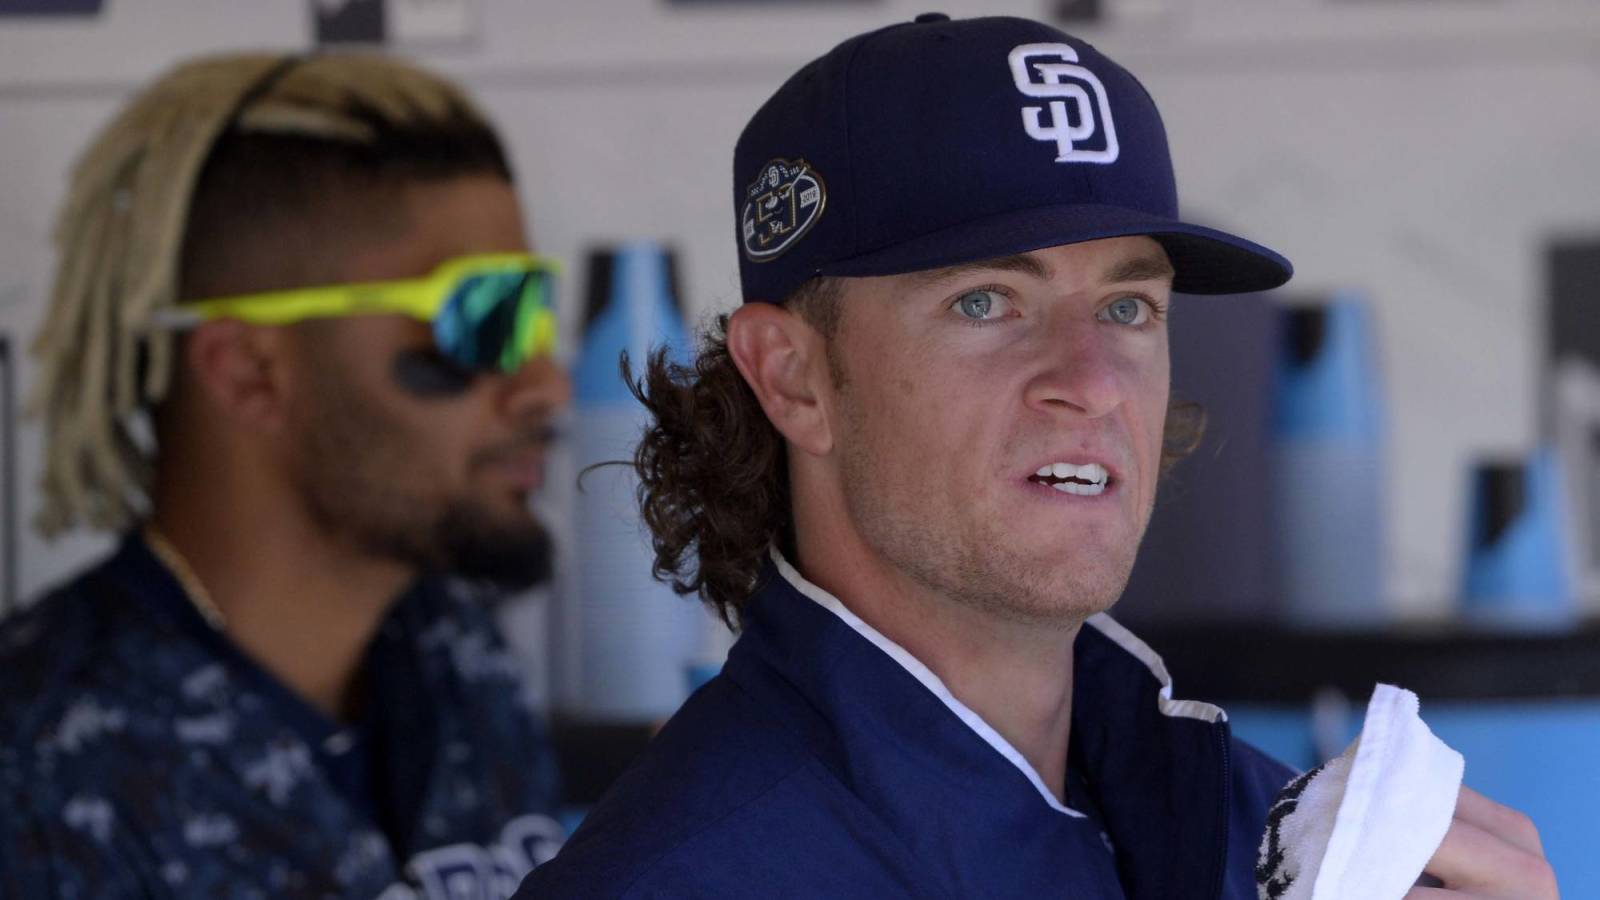 Watch: Padres pitcher Chris Paddack gets thrown out at first from